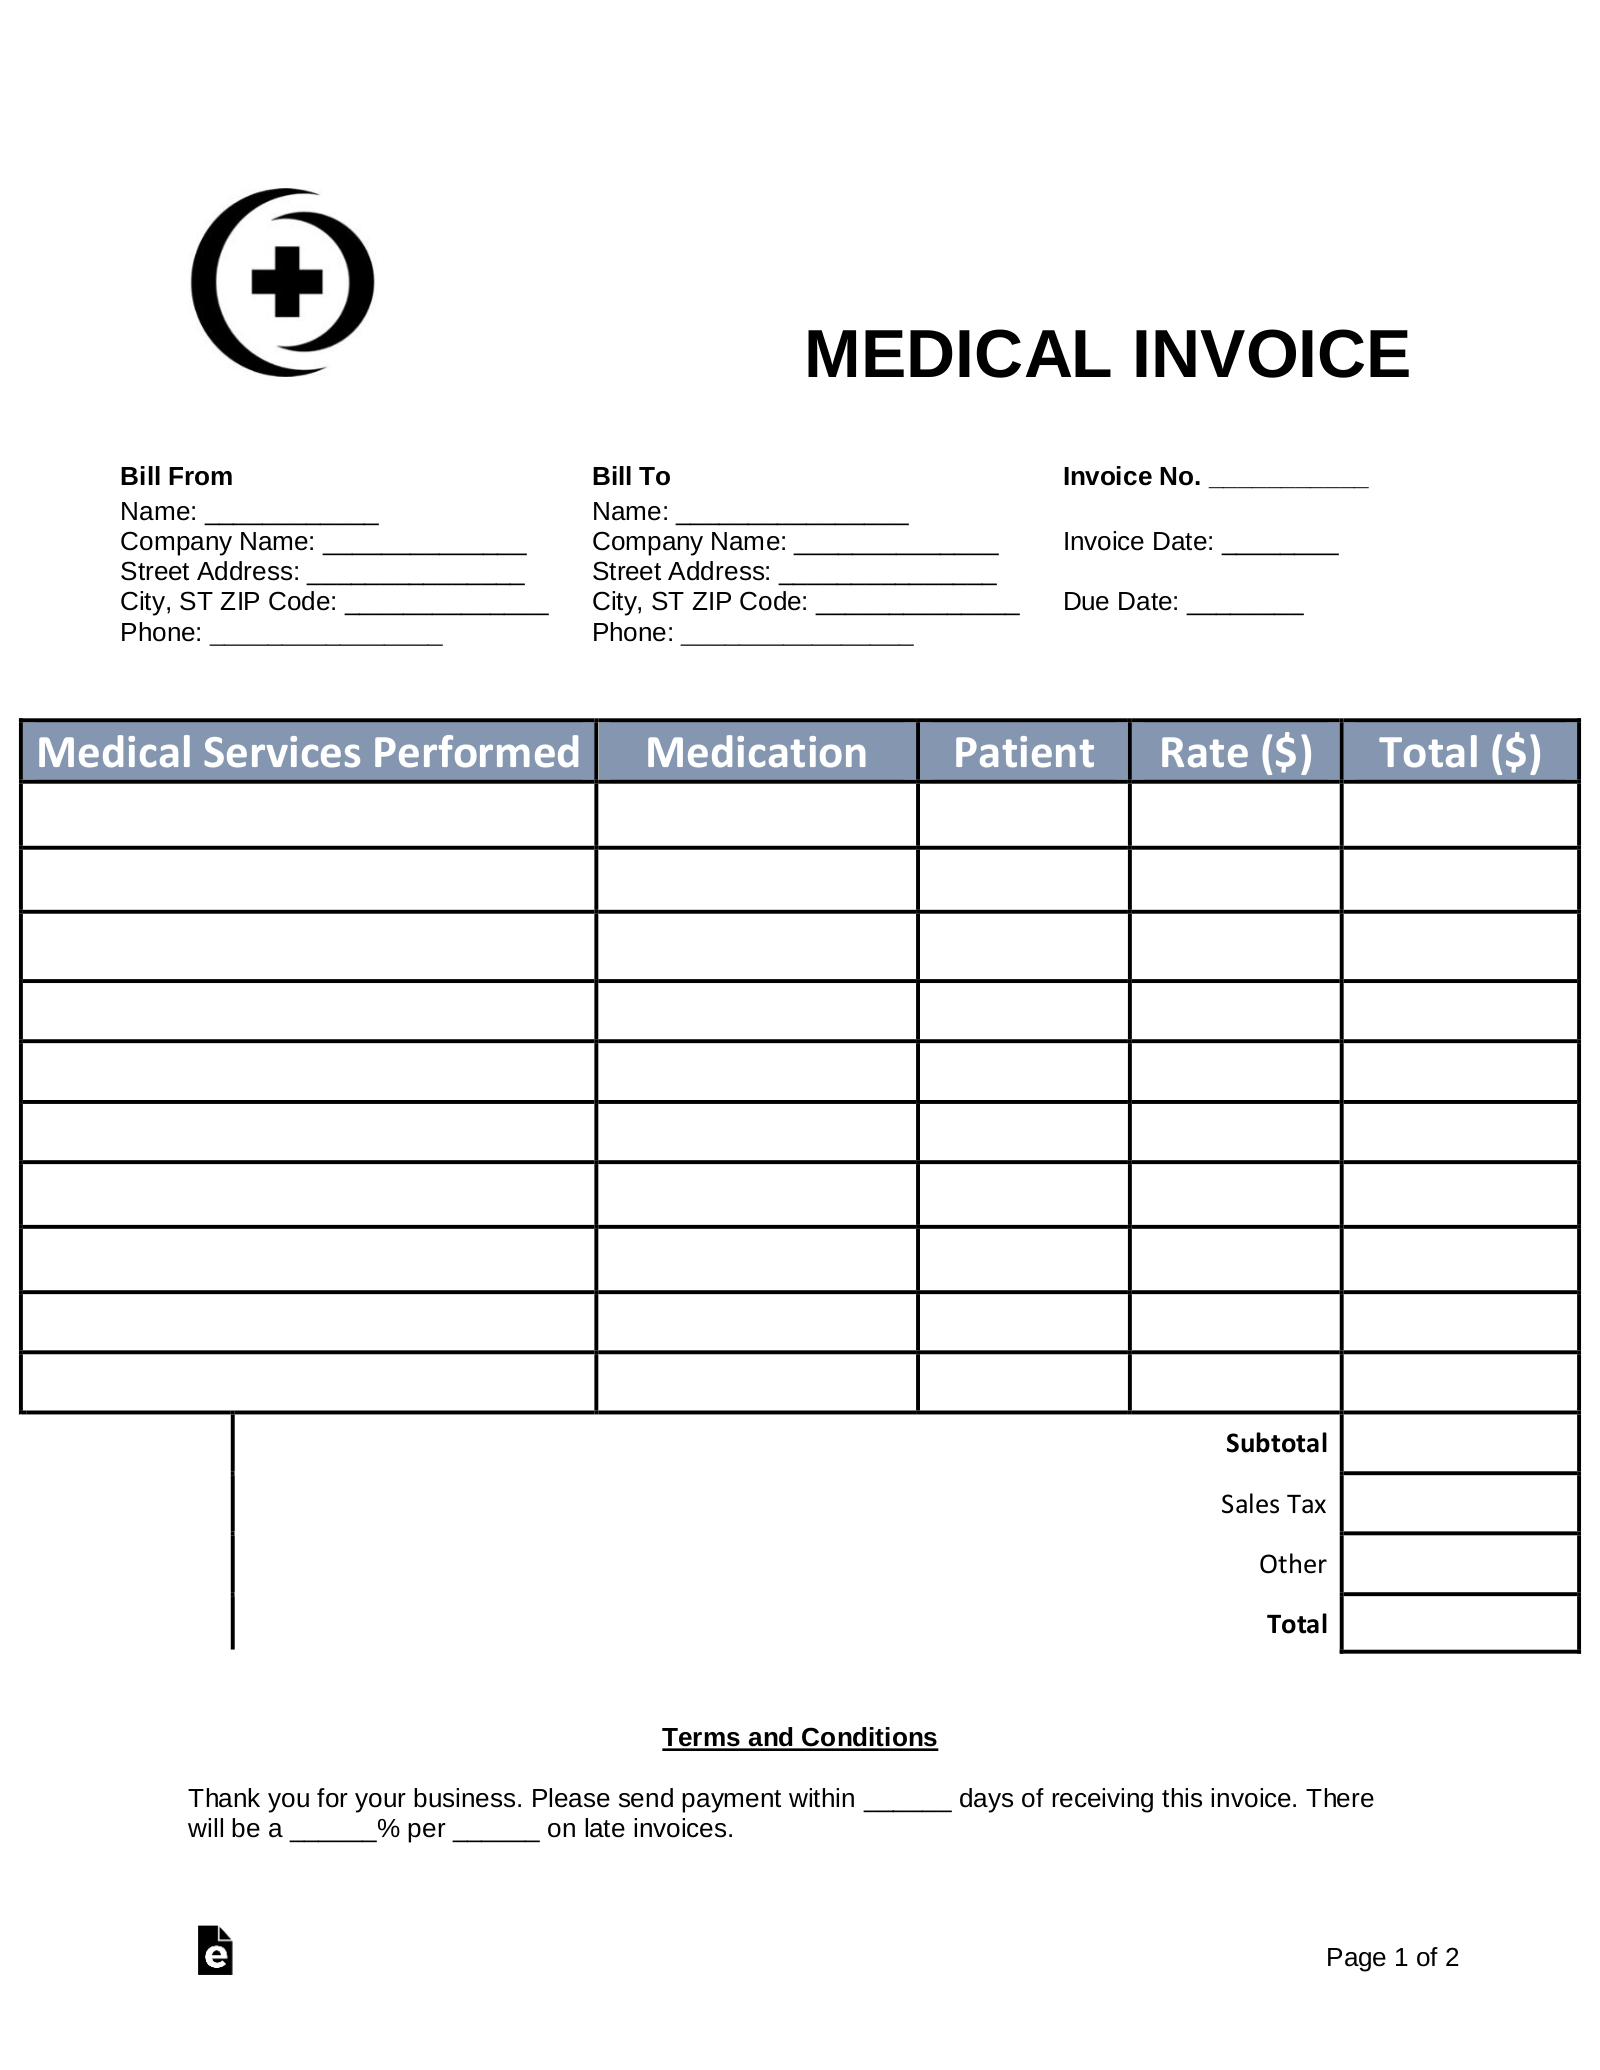 Free Medical Invoice Template - Word | Pdf - Eforms within Patient Insurance Statement Template